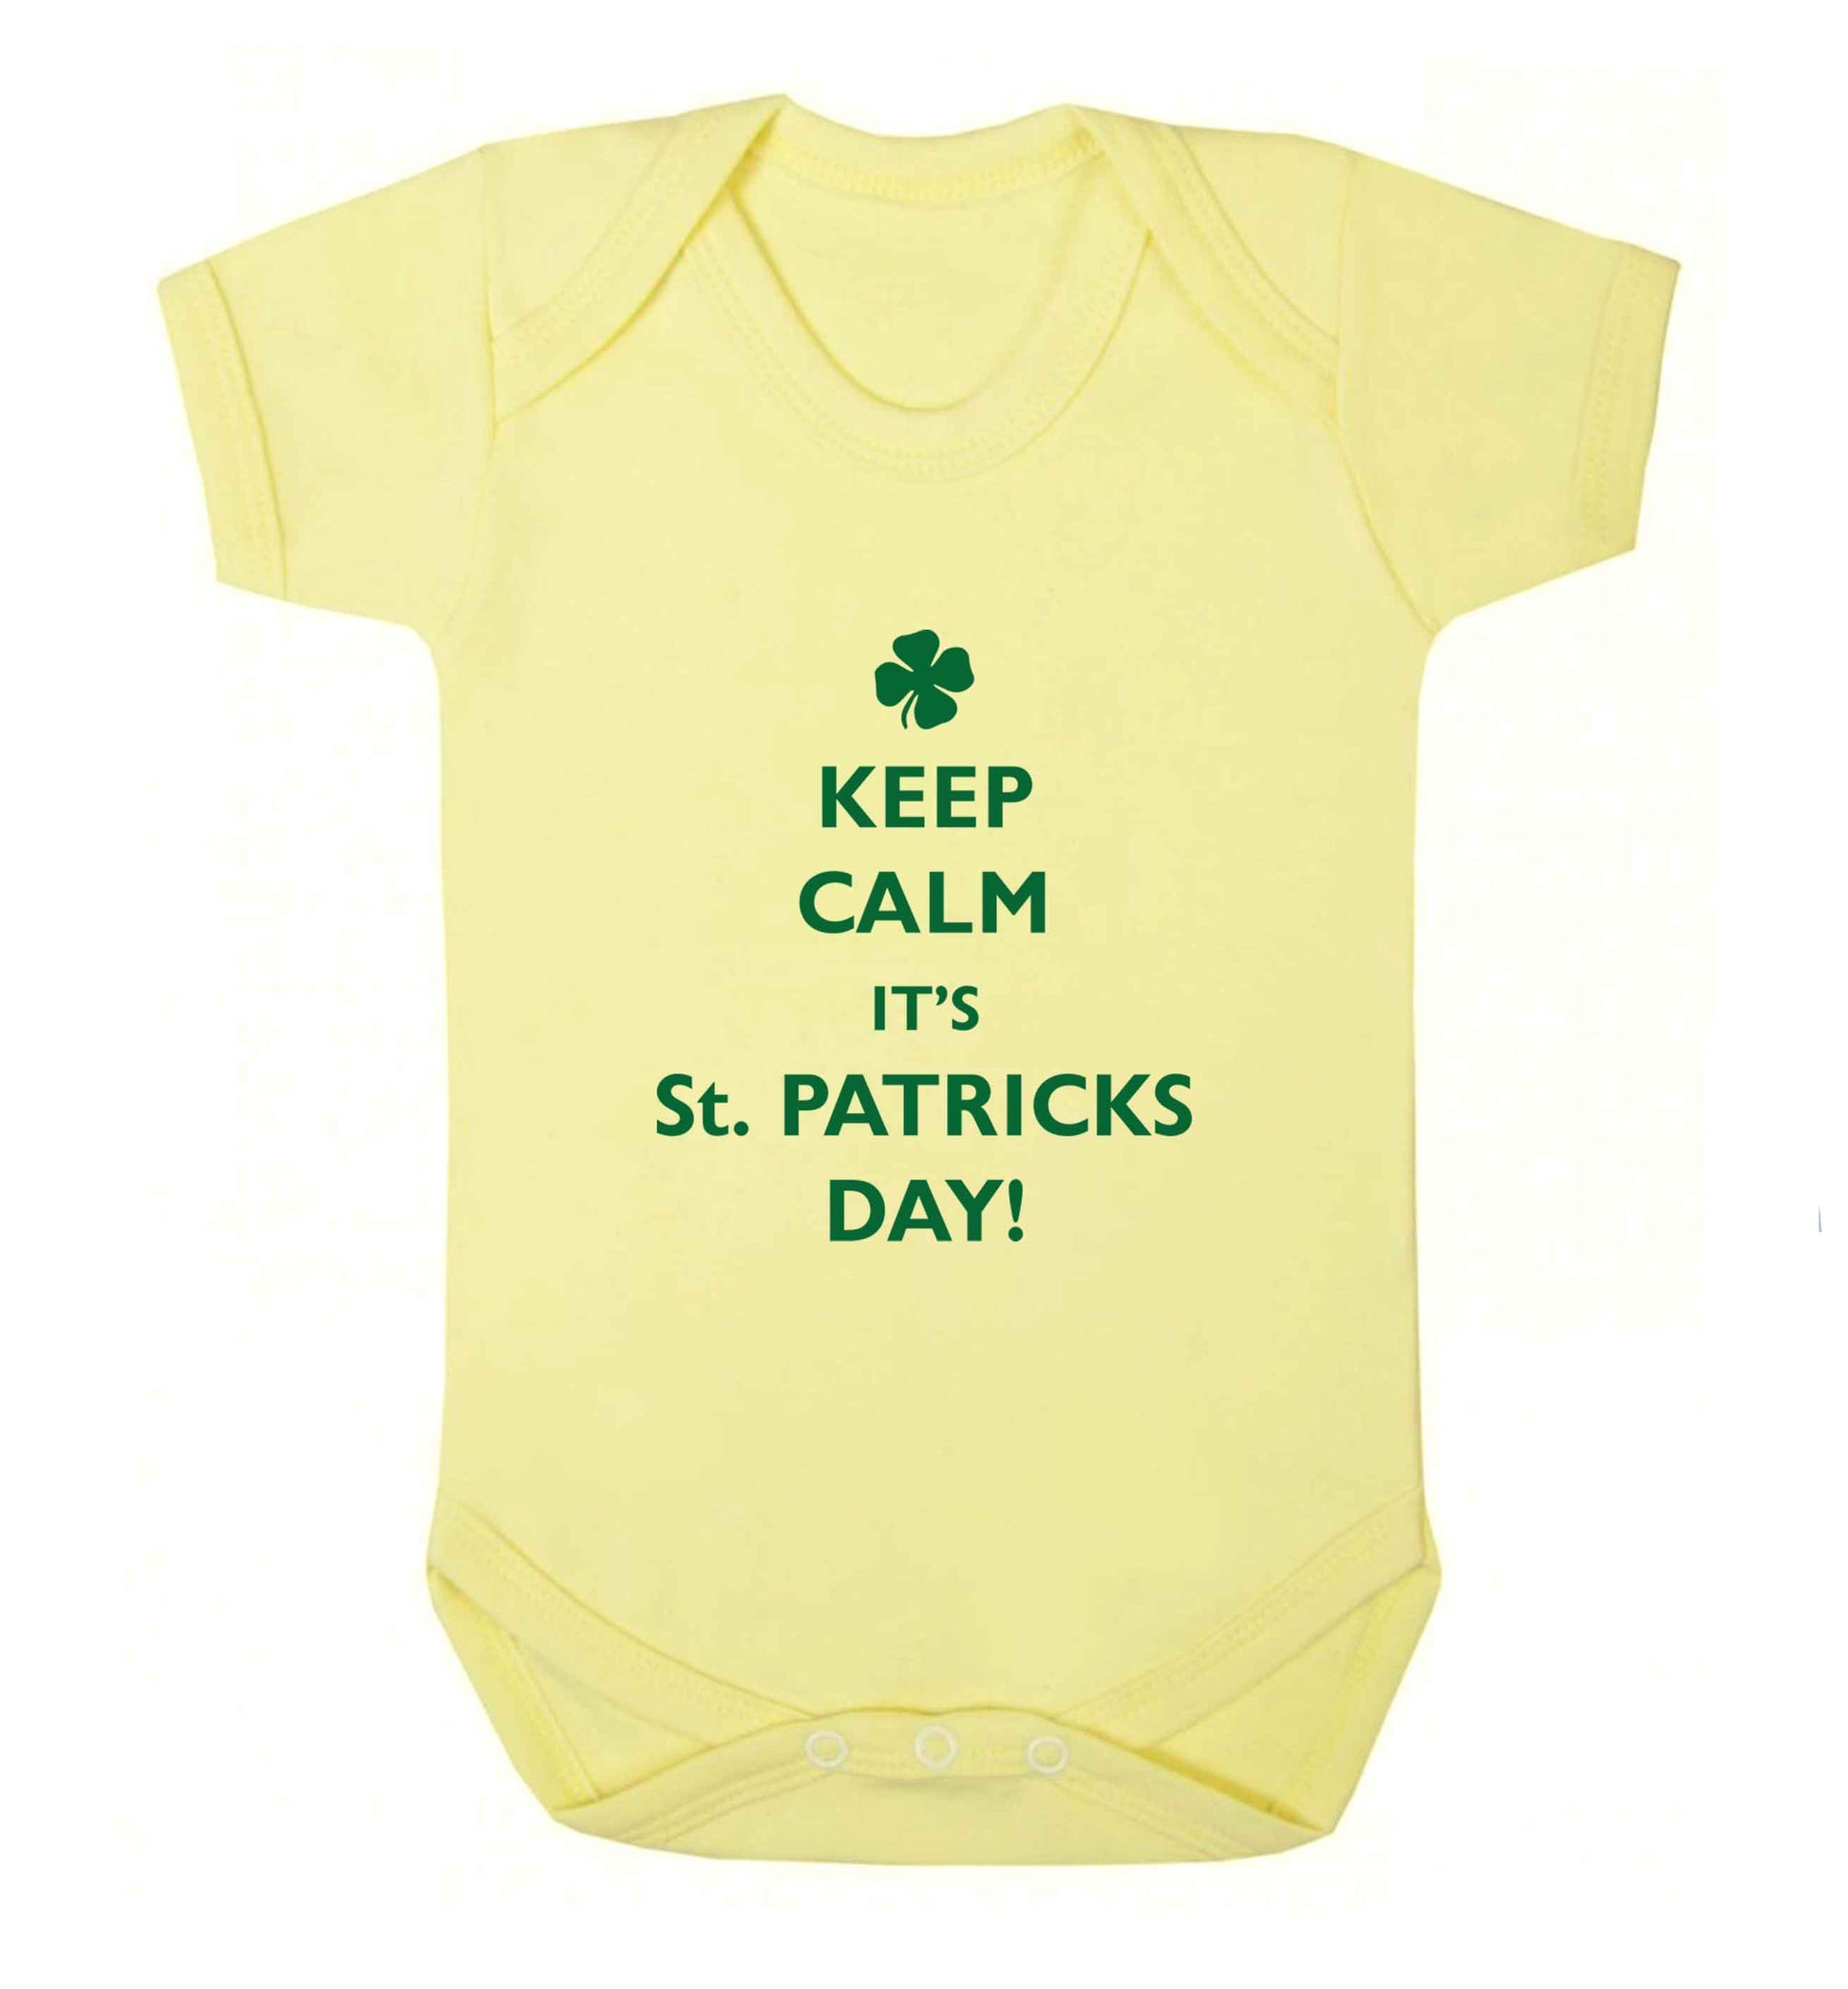 Keep calm it's St.Patricks day baby vest pale yellow 18-24 months